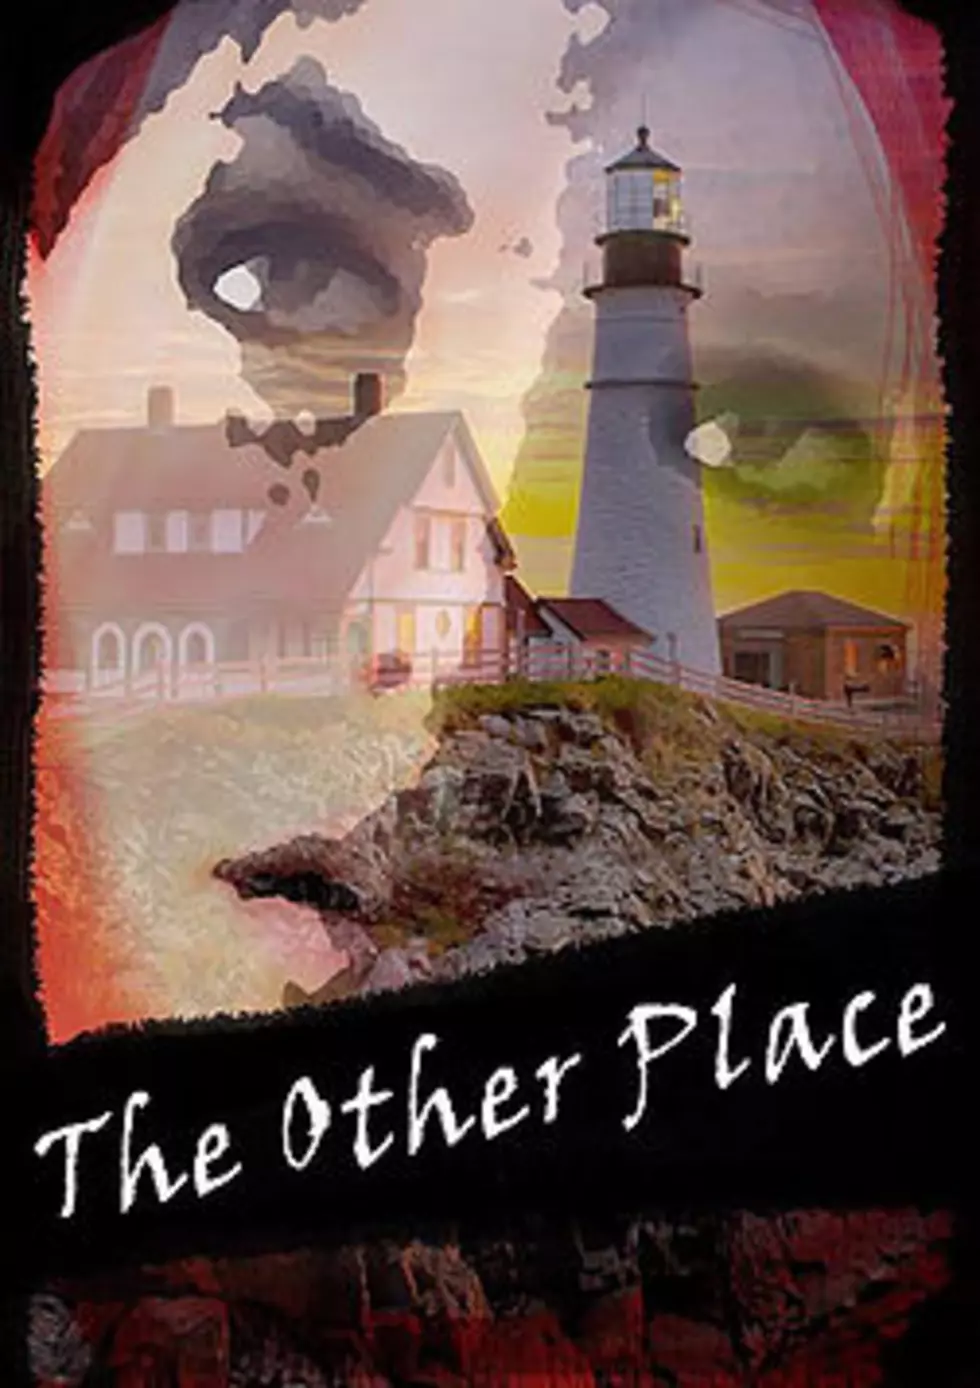 New Local Theatre Company To Stage Inaugural Production: “The Other Place”